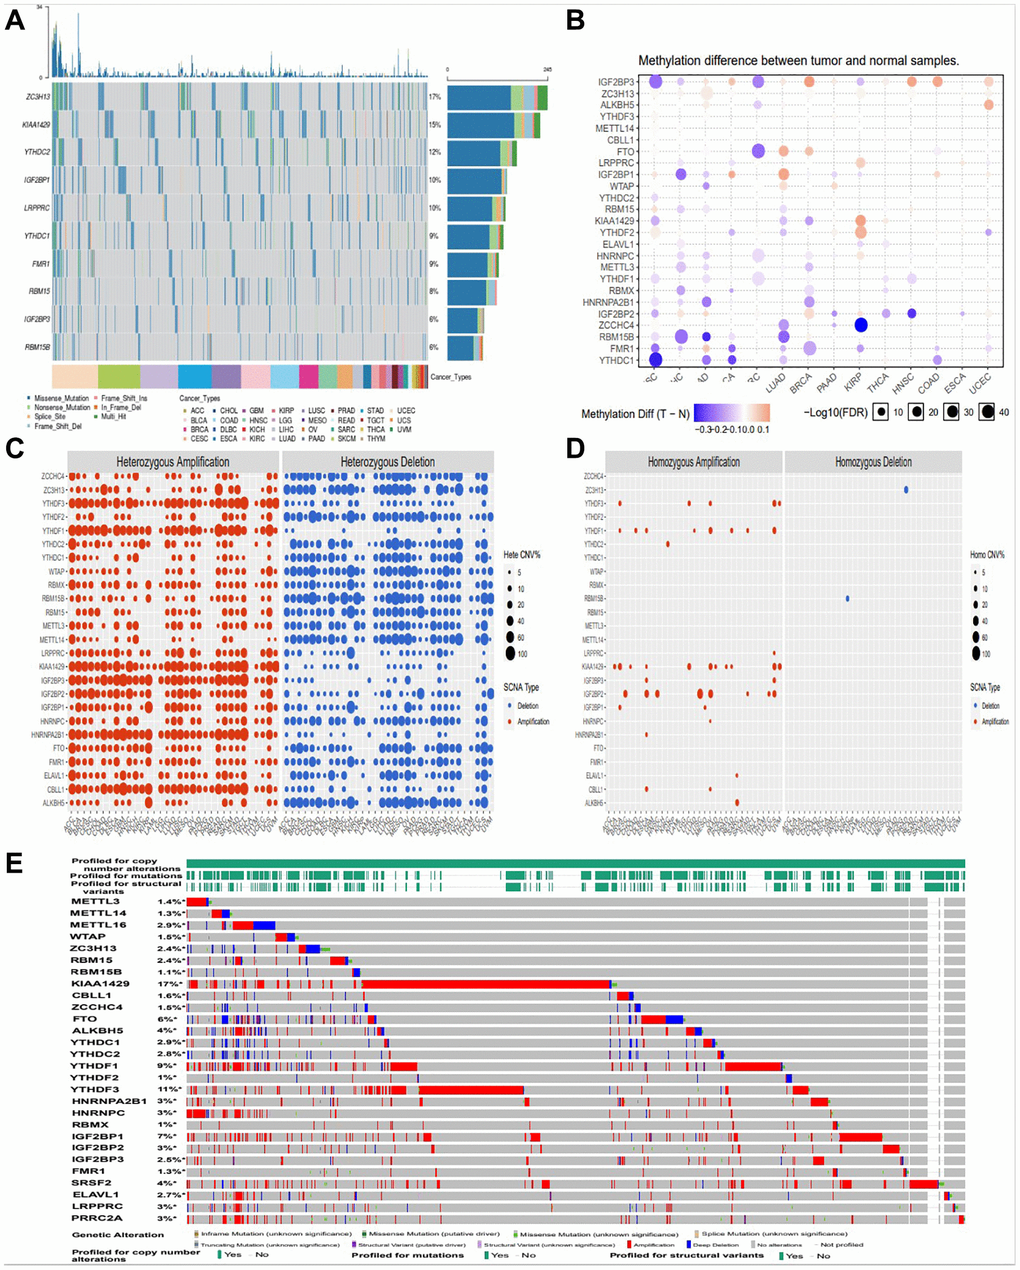 Amplification, deletion, and mutation analysis of m6A regulators. (A) The waterfall plot showed a mutation distribution of top 10 mutated genes and a SNV classification of SNV types in pan-cancer (B) Methylation module explores the differential methylation between tumor and paired normal, the correlation between methylation with expression and the OS affected by methylation level for selected cancer types. (C, D) Heterozygous/Homozygous CNV profile show you percentage of heterozygous/homozygous CNV including amplification and deletion percentage of heterozygous/homozygous CNV about each gene in each cancer. Only genes with >5% CNV in cancers will show corresponding points on the figure (Abbreviations: Hete Amp: heterozygous amplification; Hete Del: heterozygous deletion; Homo Amp: homozygous amplification; Homo Del: homozygous deletion; None: no CNV). (E) cBioPortal focus on homozygous CNV in the present.